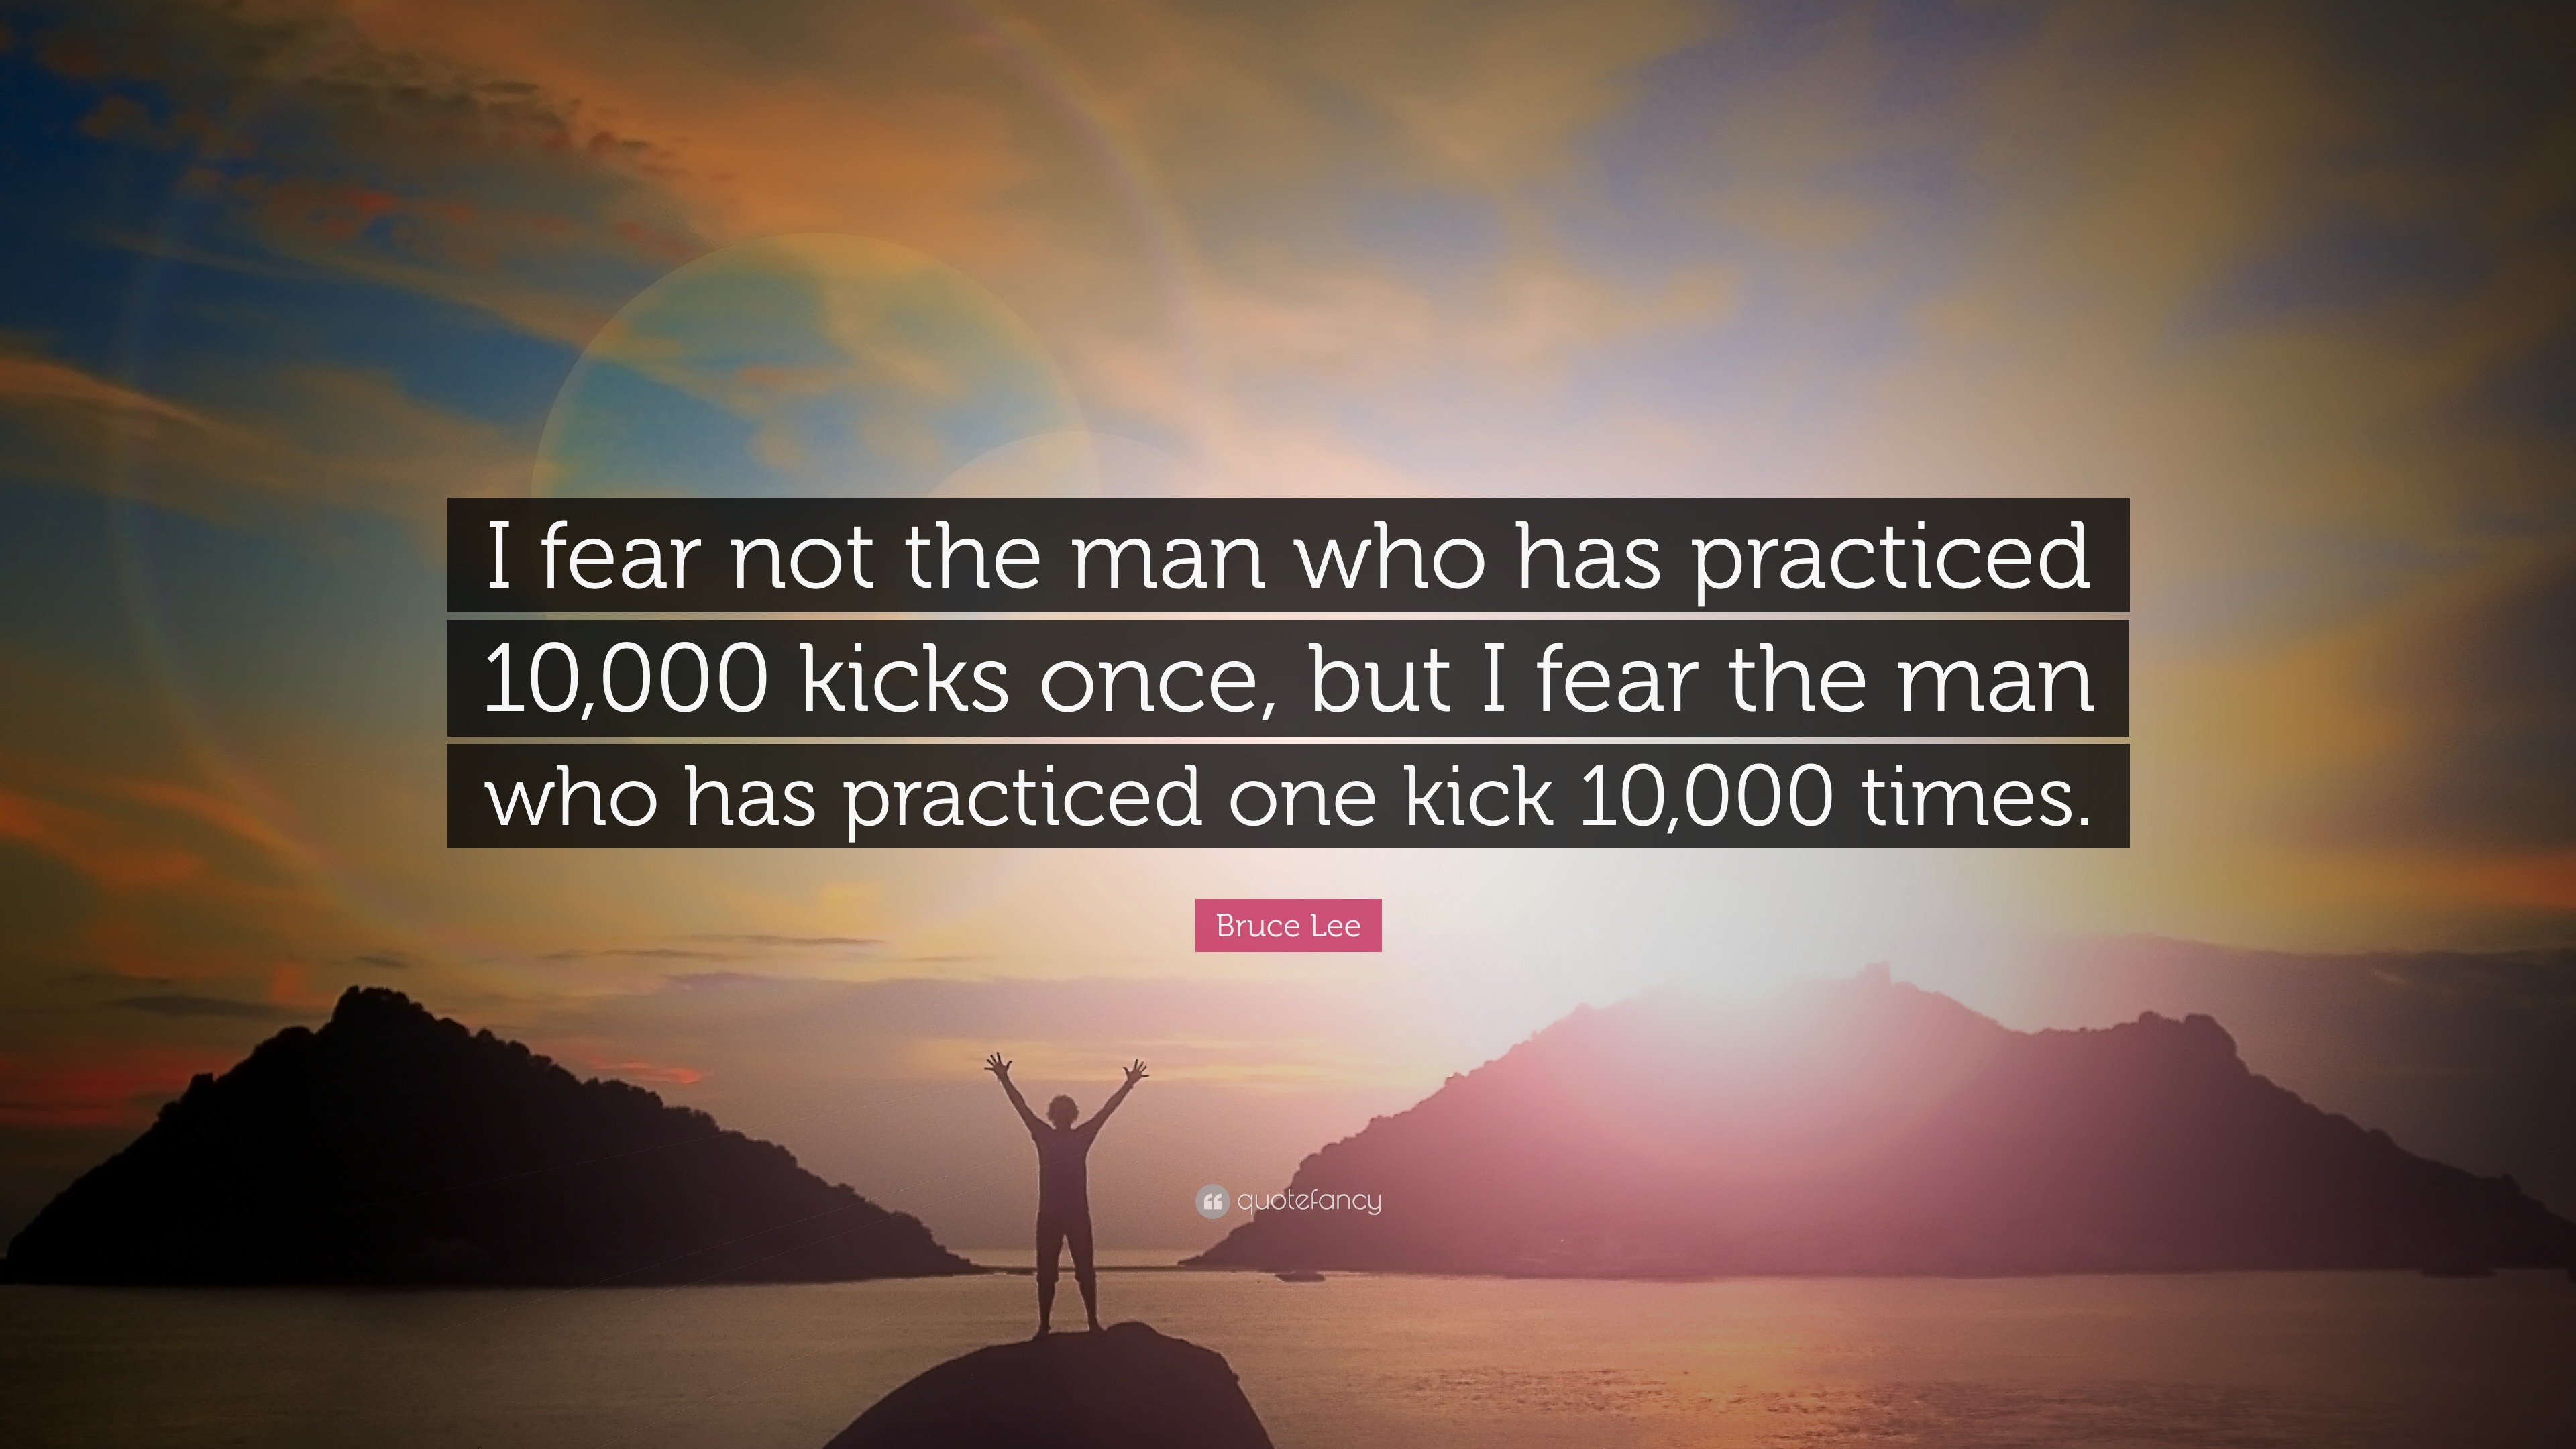 Bruce Lee Quote I Fear Not The Man Who Has Practiced Kicks Once But I Fear The Man Who